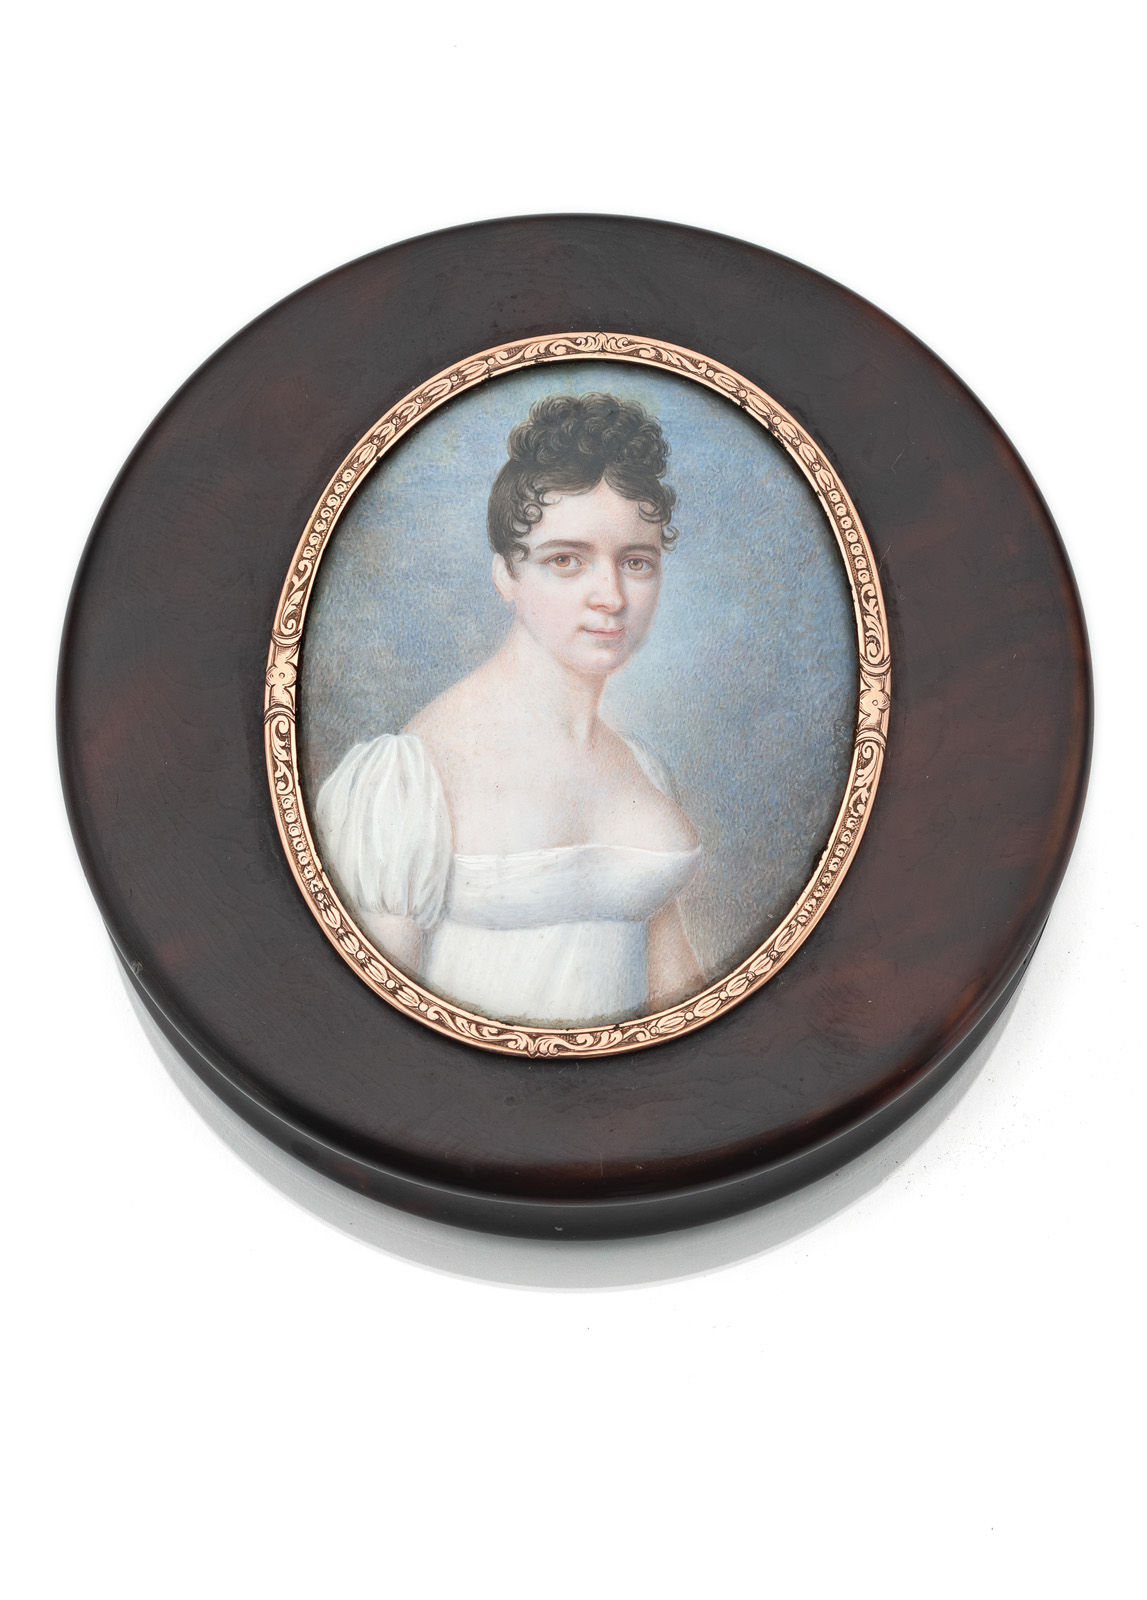 A TORTOISE SHELL TABATIERE WITH A POTRAIT OF A YOUNG LADY IN A WHITE DRESS